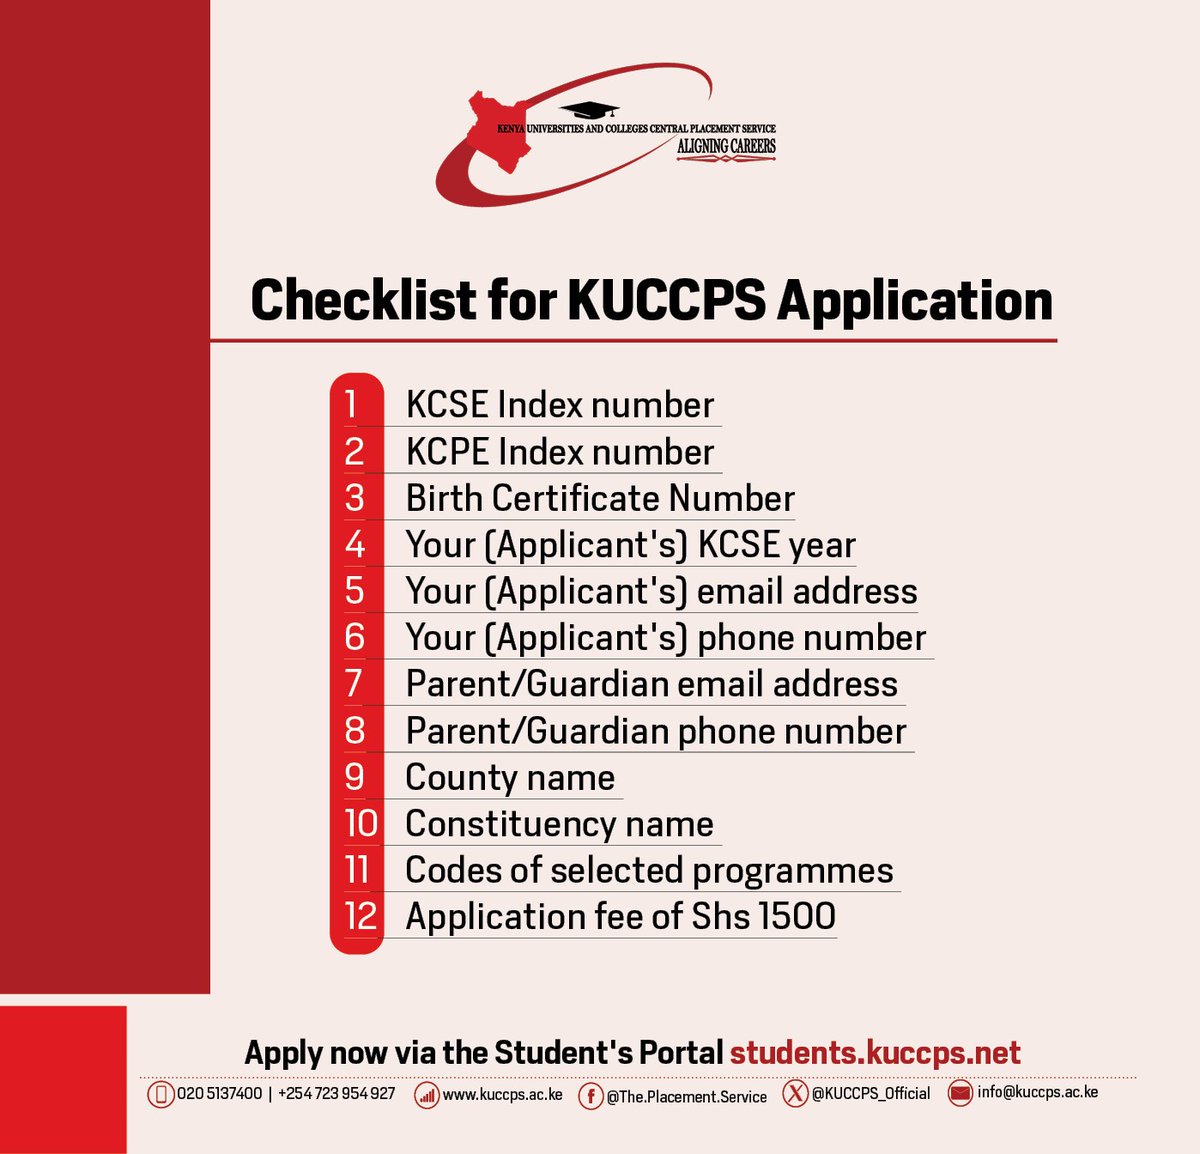 Want to save time on the KUCCPS Portal?  
Ensure you have these before you start your application.

1. Your KCSE Index No. and KCSE year
2. Your KCPE Index No. or Birth Certificate No.
3. Your Phone No. and that of your parent/guardian